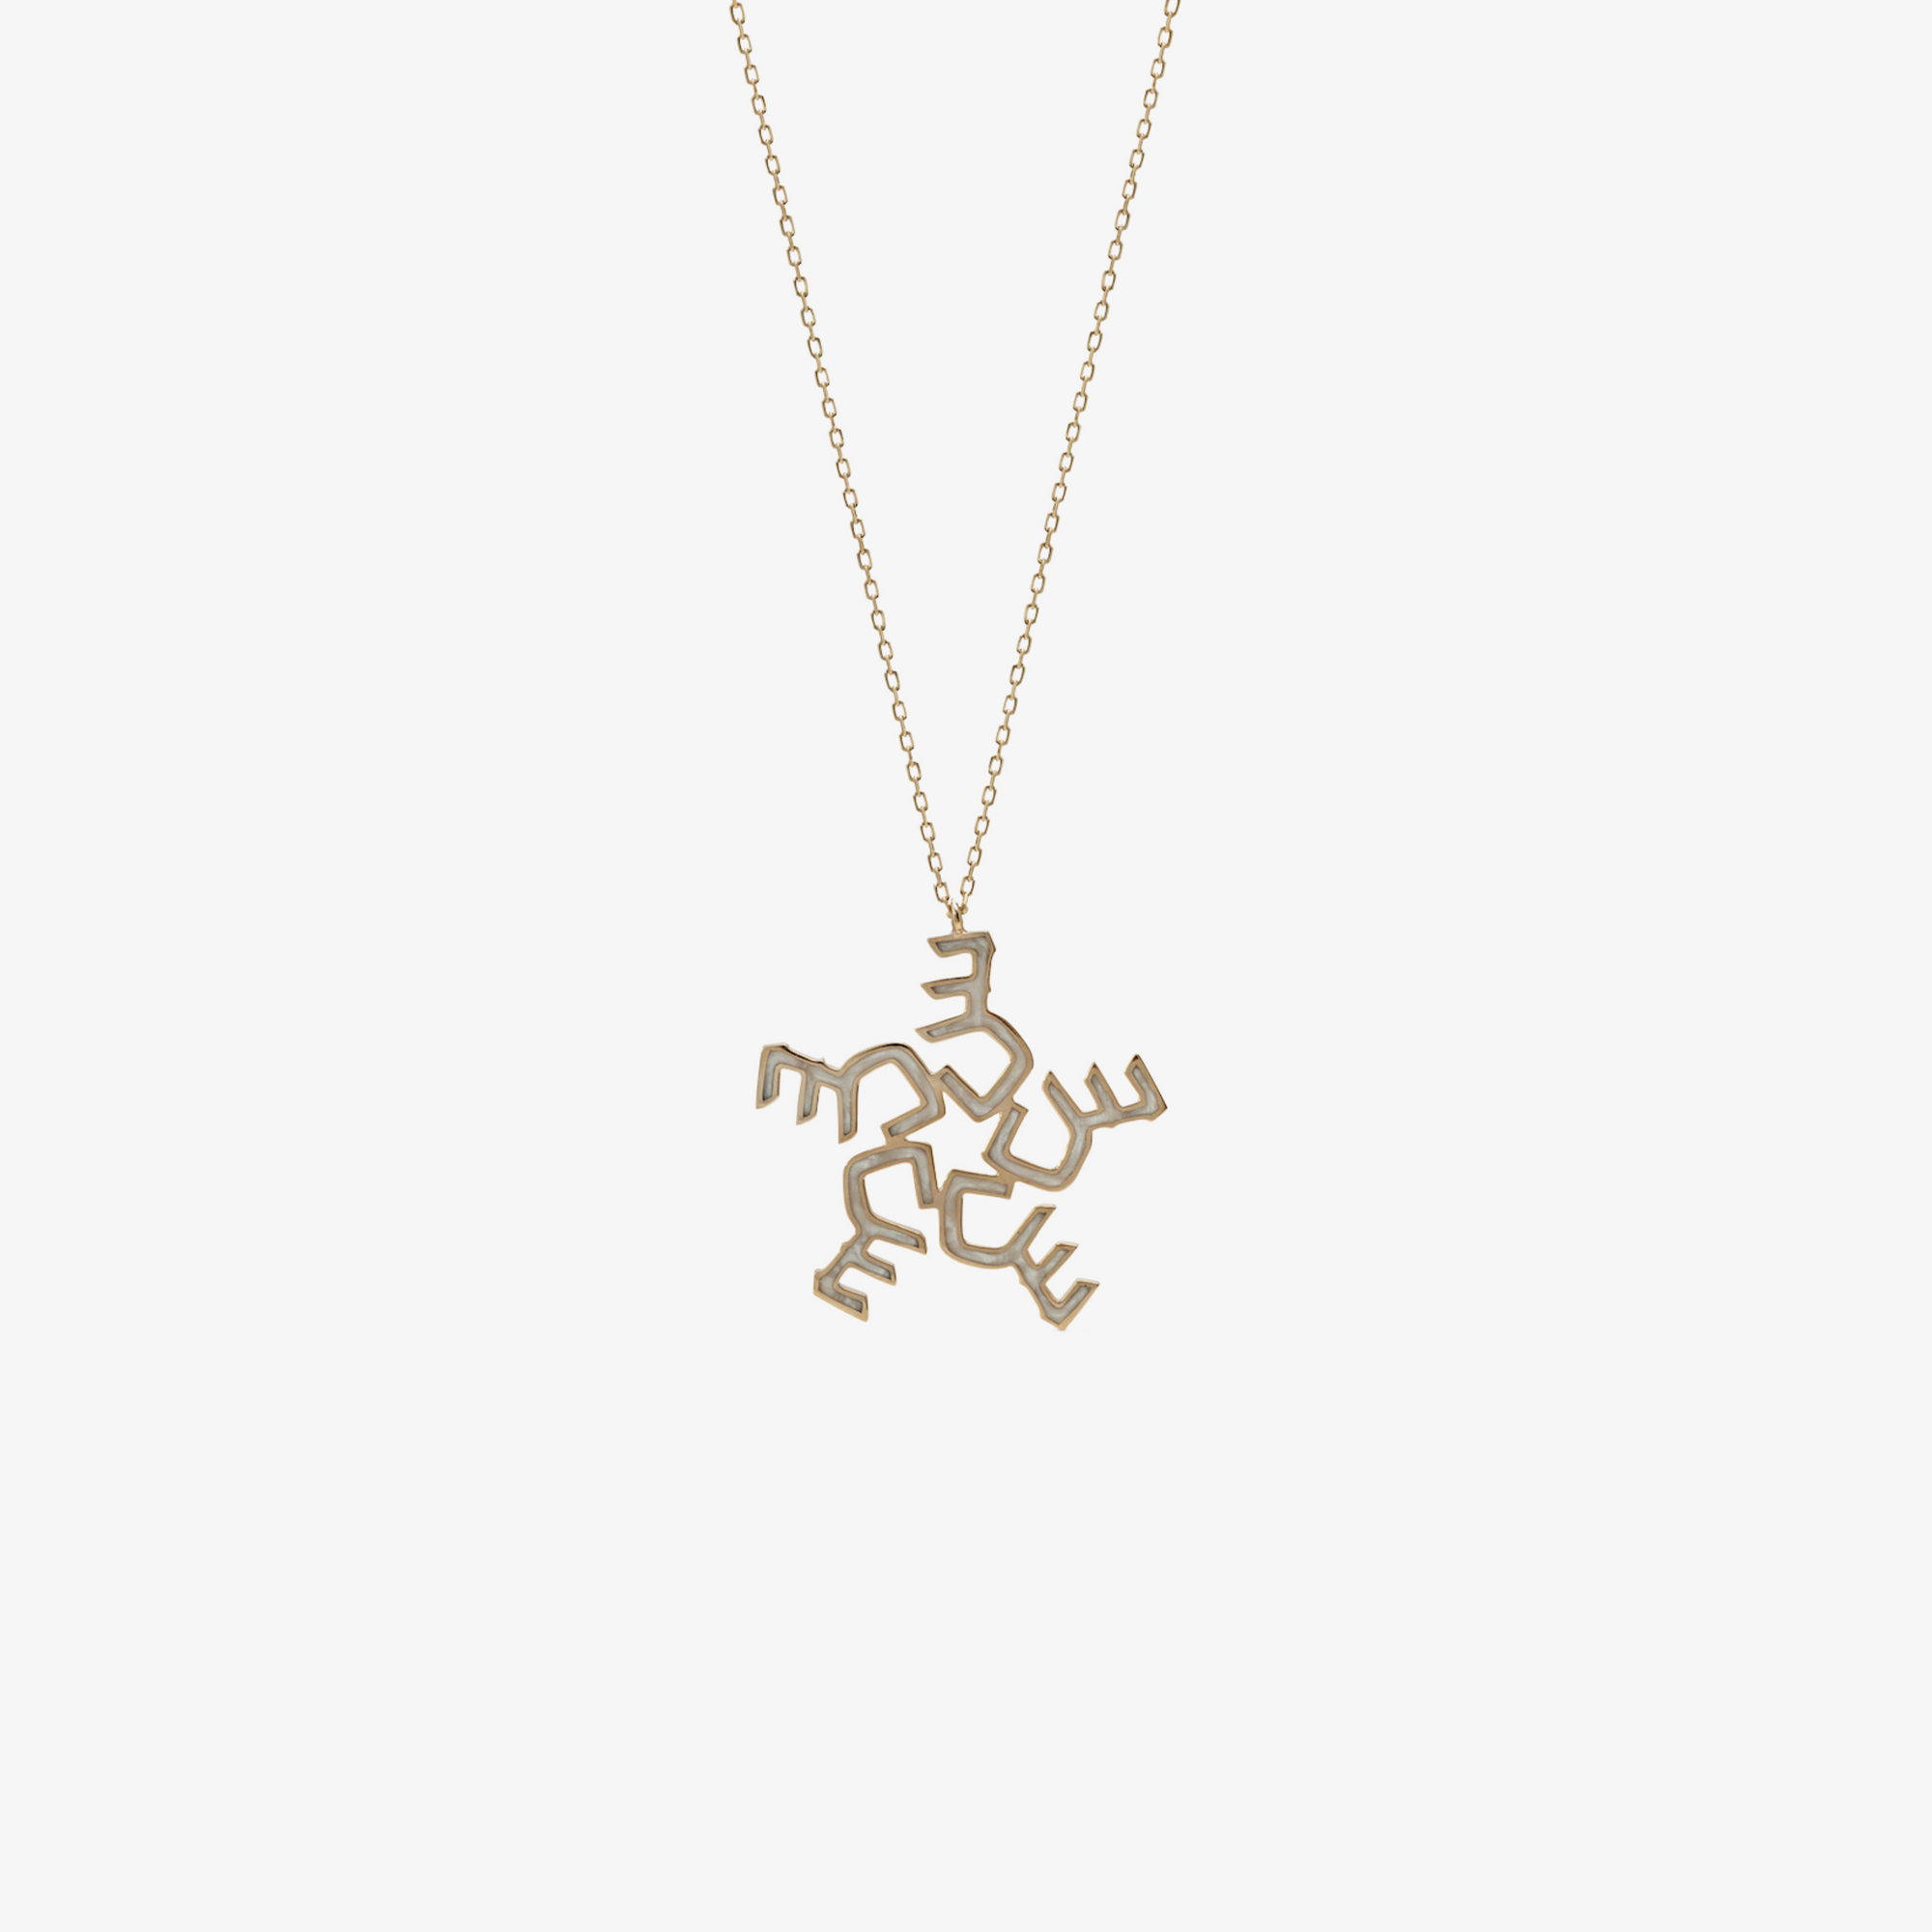 OULA — Gold Star Shaped Letter Necklace